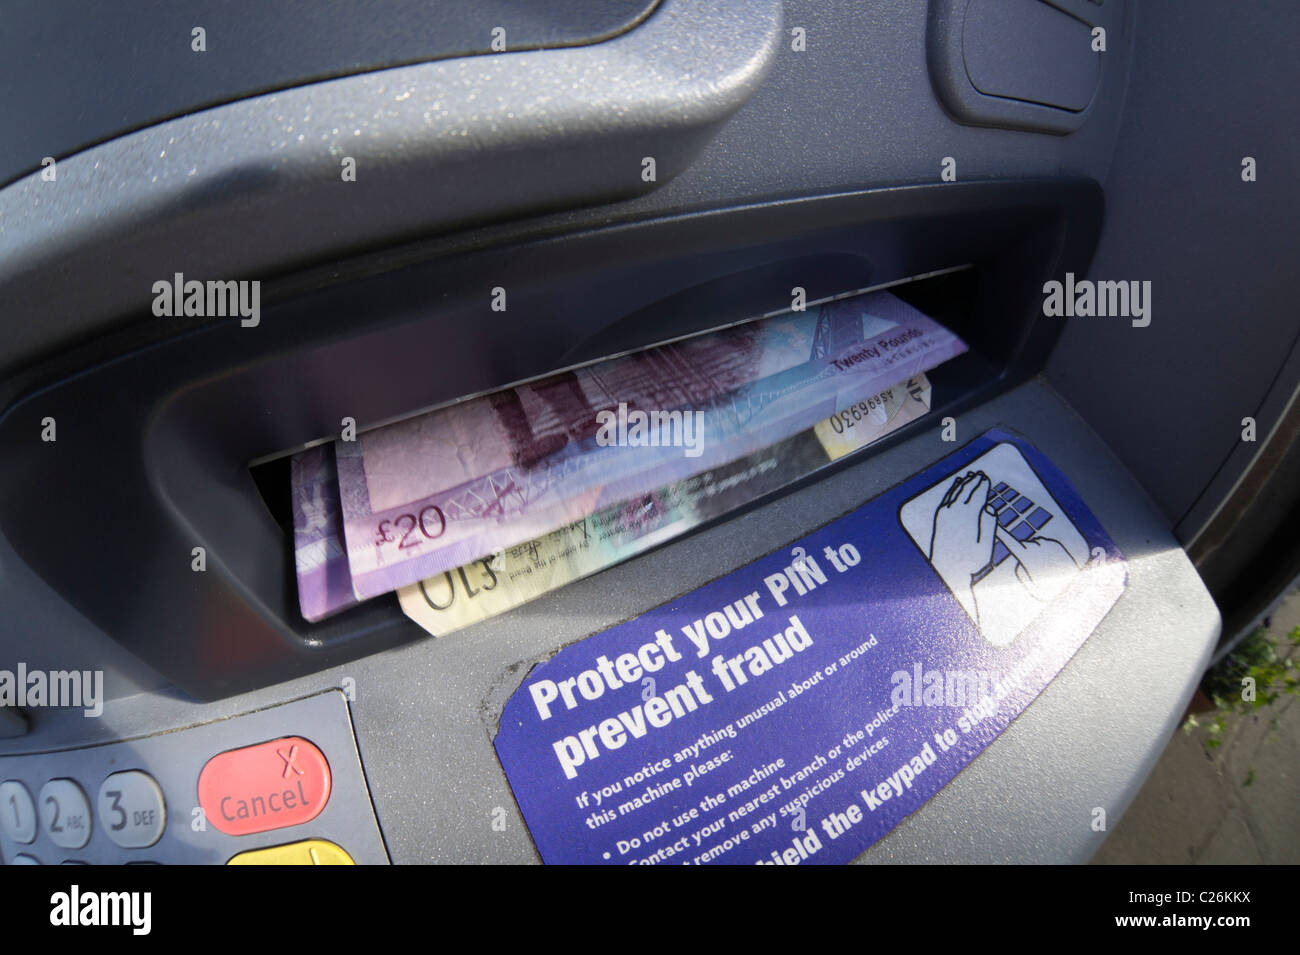 Fifty pounds - notes ejected from ATM cash machine, Scotland. These are Scottish bank notes not English. Stock Photo